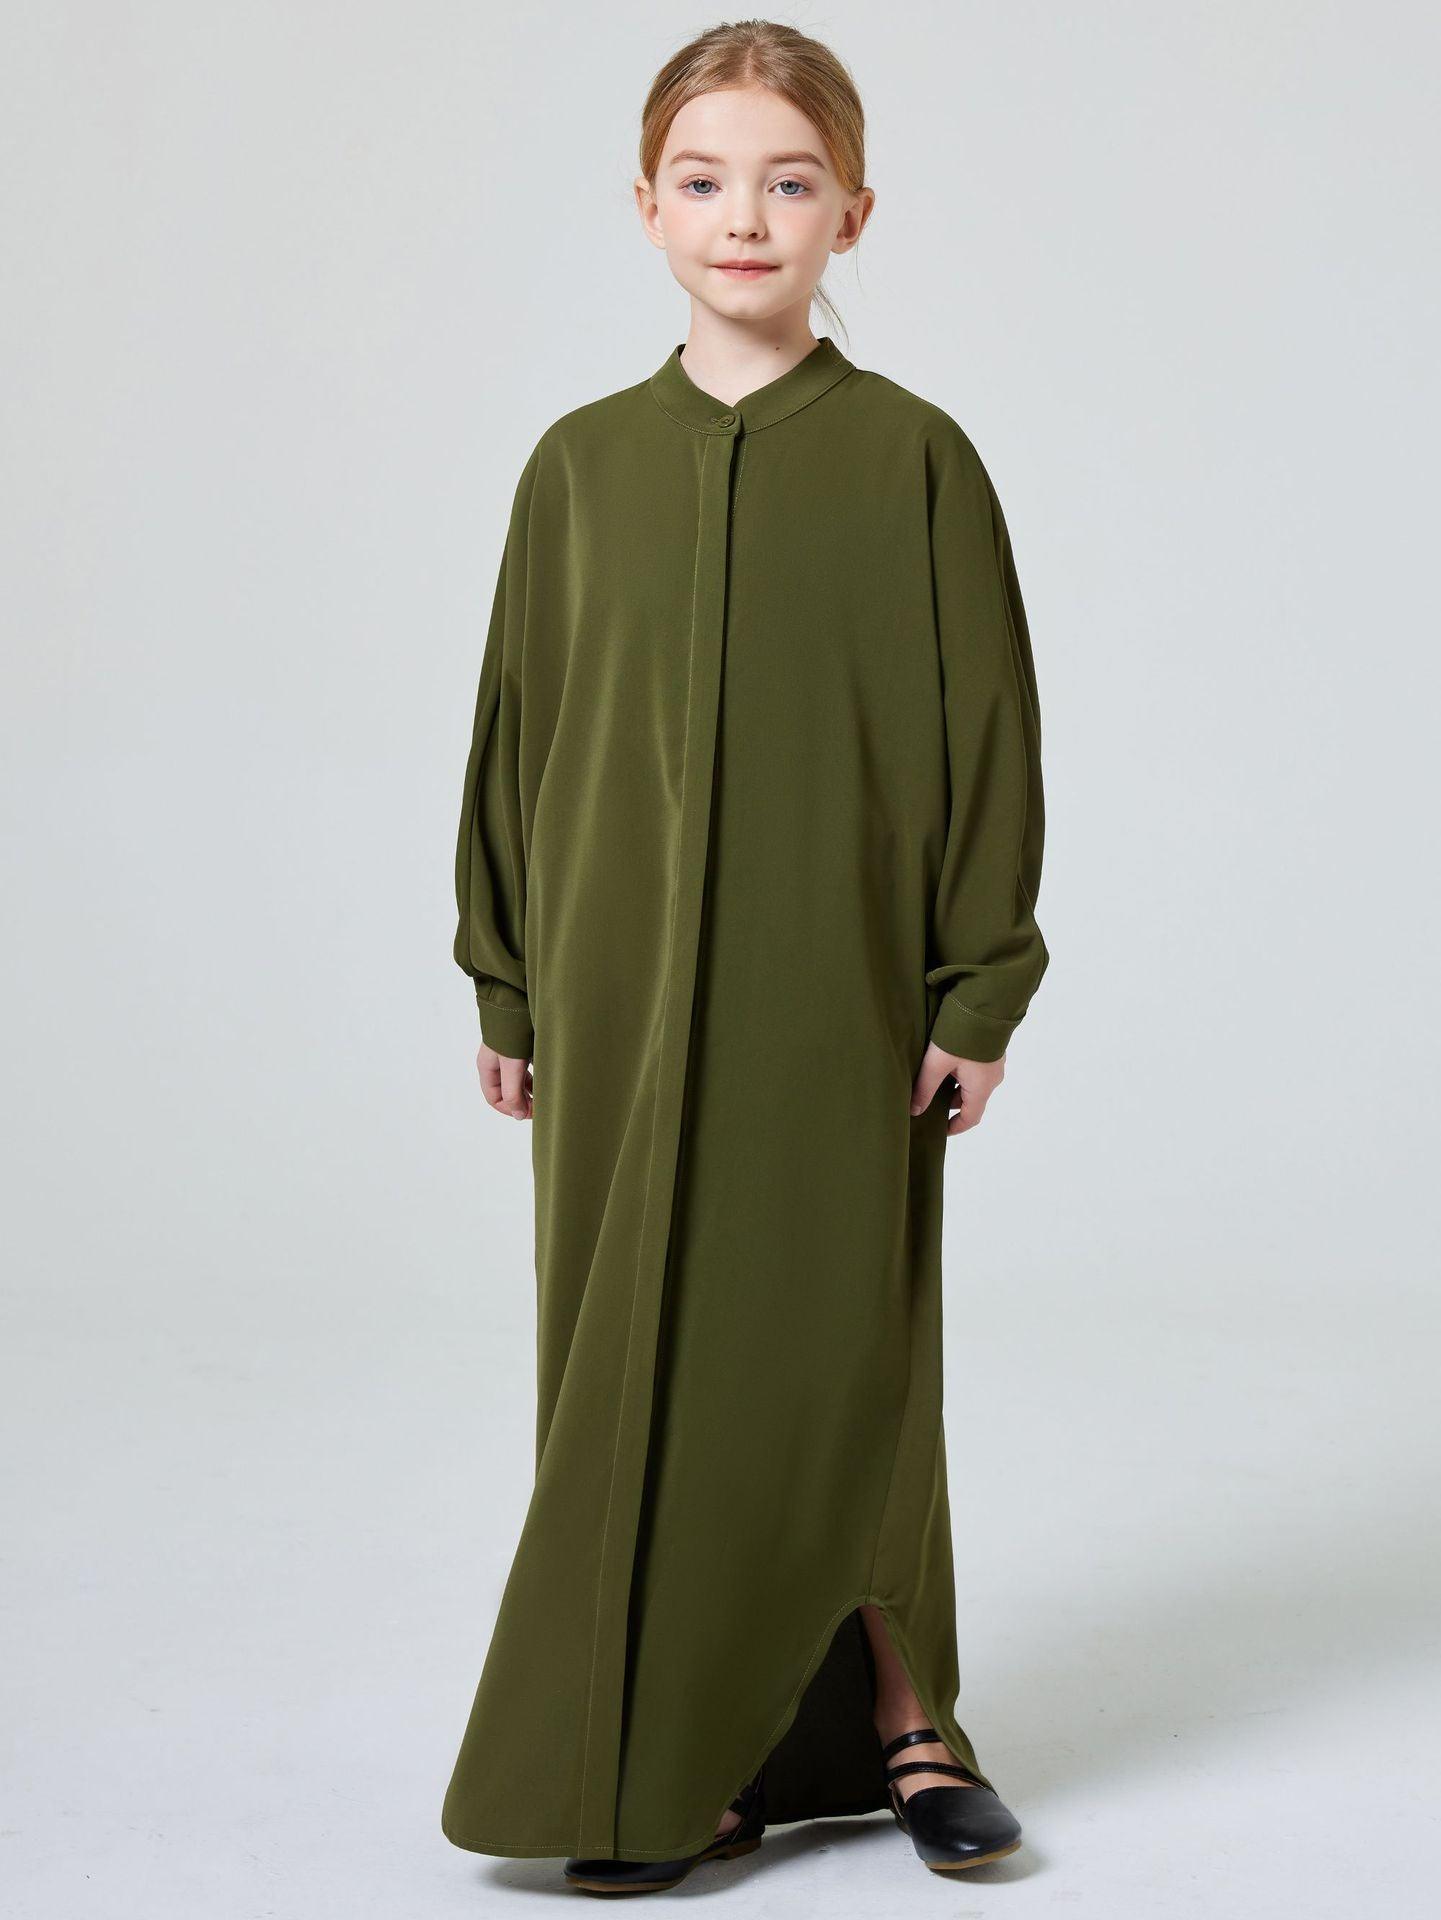 MKG005 Kids Small Standing Collar Button Abaya - Mariam's Collection